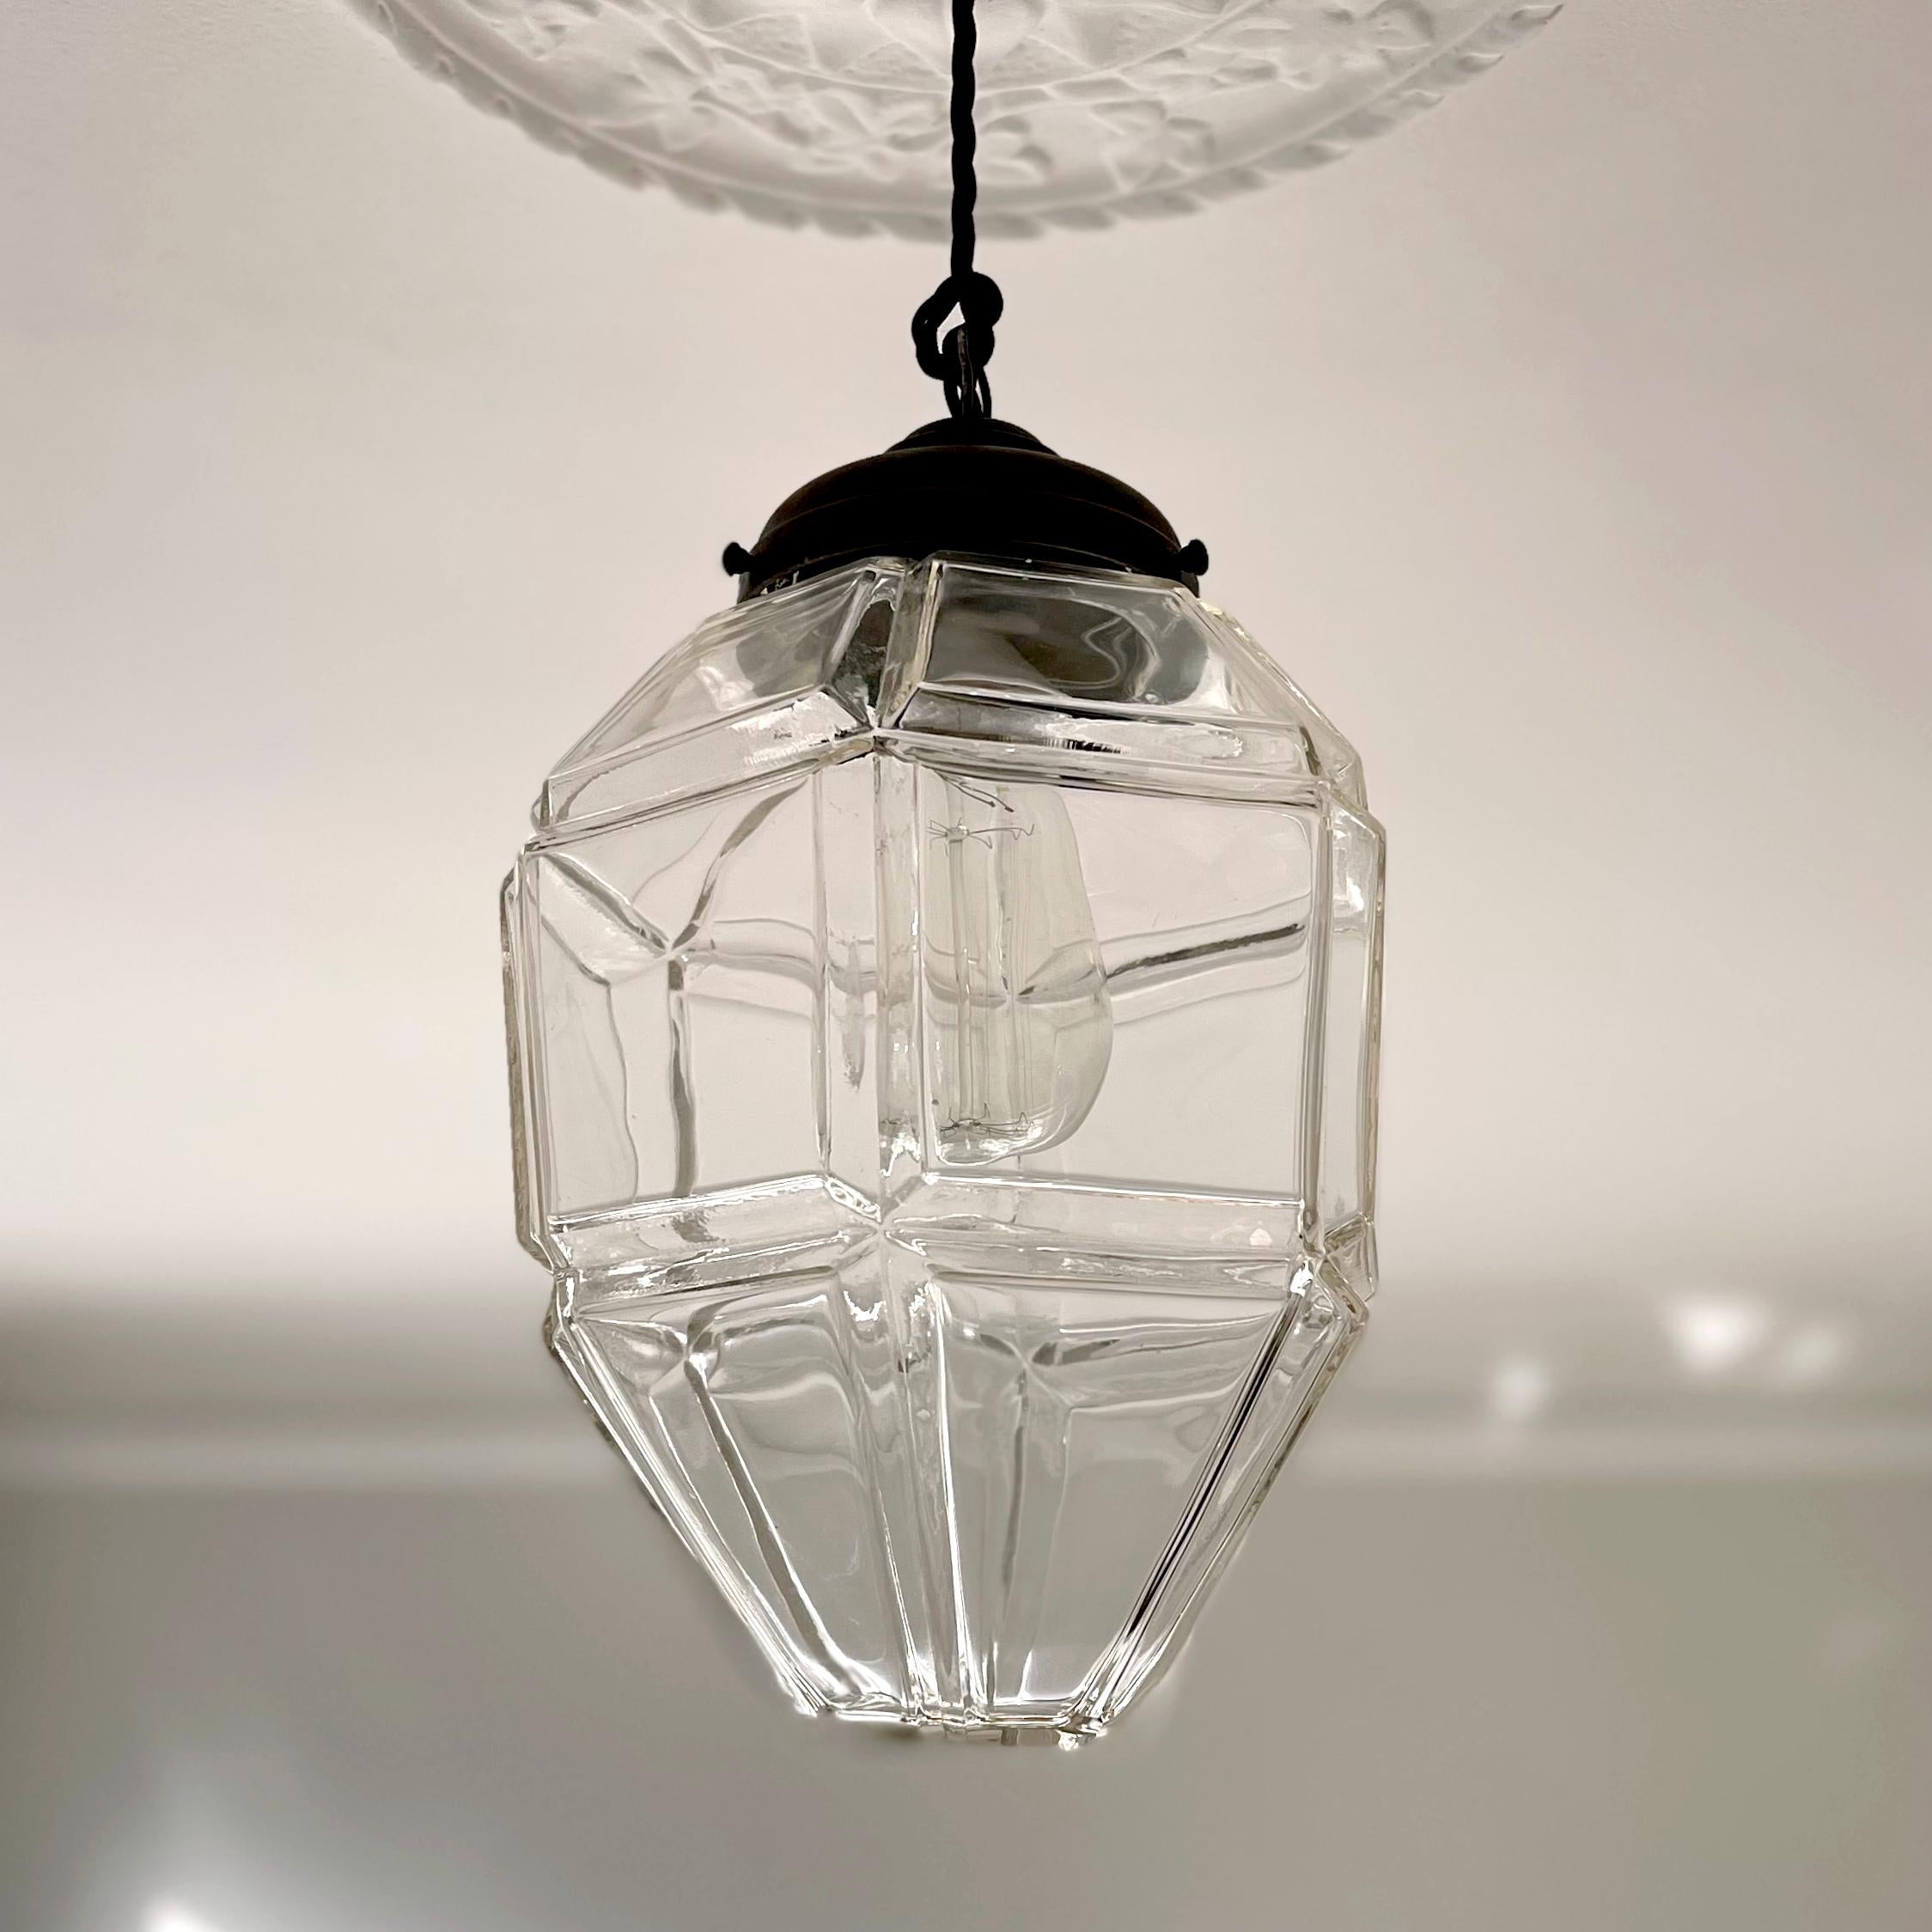 Early Scandinavian Modern

A beautiful pendant with clear glass shade and patinated brass mounting. Denmark, circa. 1911. 

The provenance of this lamp is from the railway station in Copenhagen by architect Heinreich Wenck, inaugurated in 1911 by